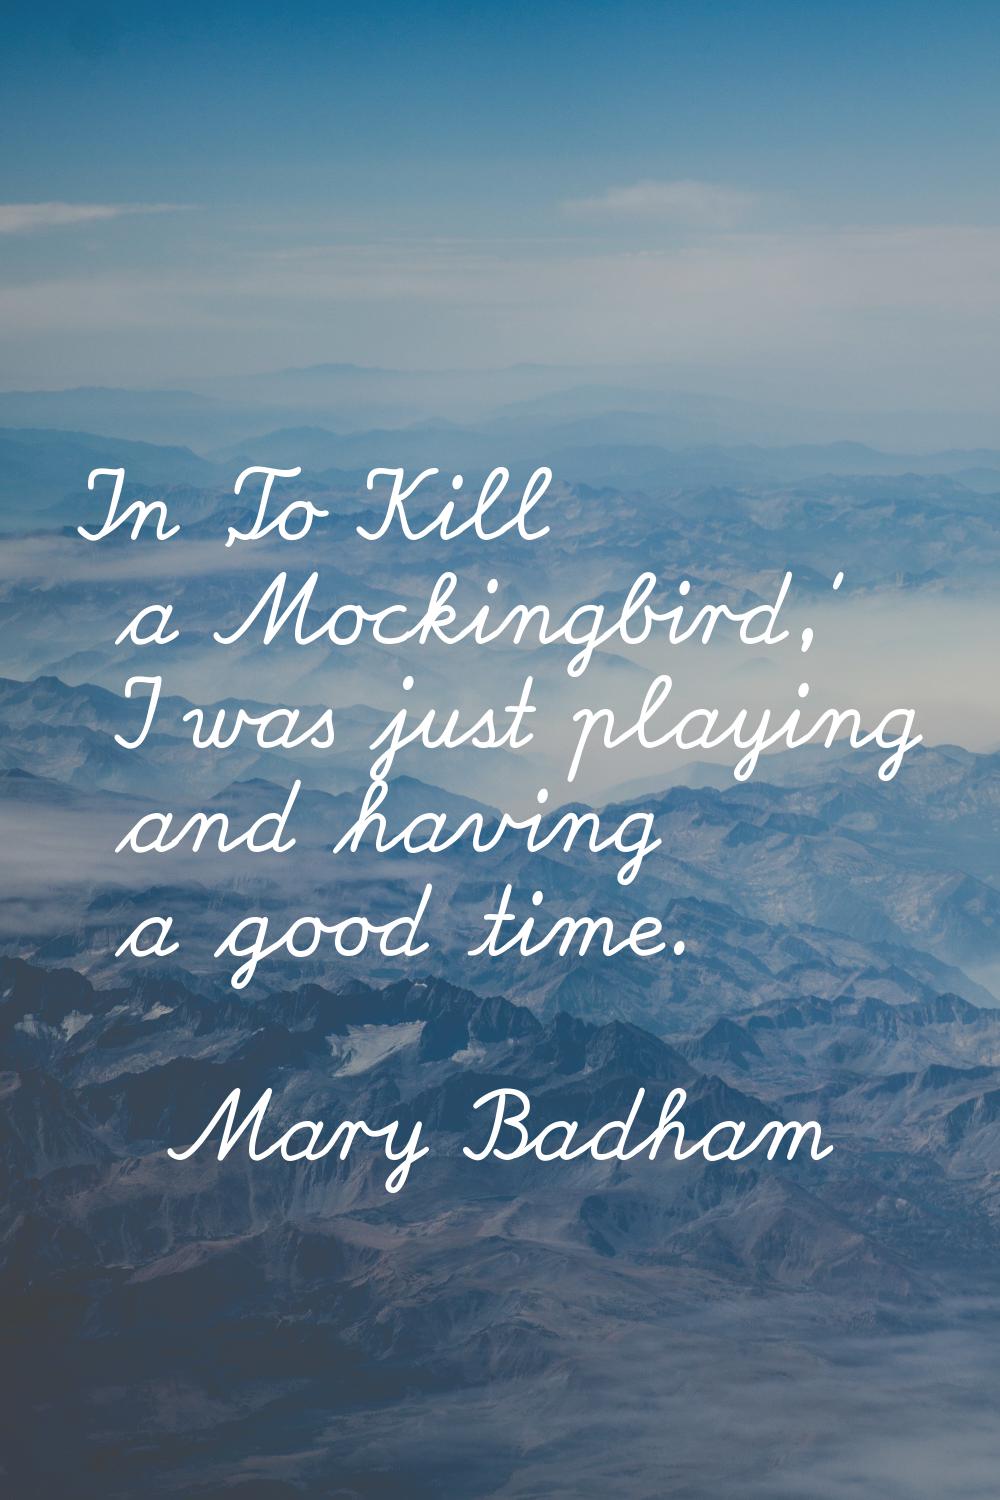 In 'To Kill a Mockingbird,' I was just playing and having a good time.